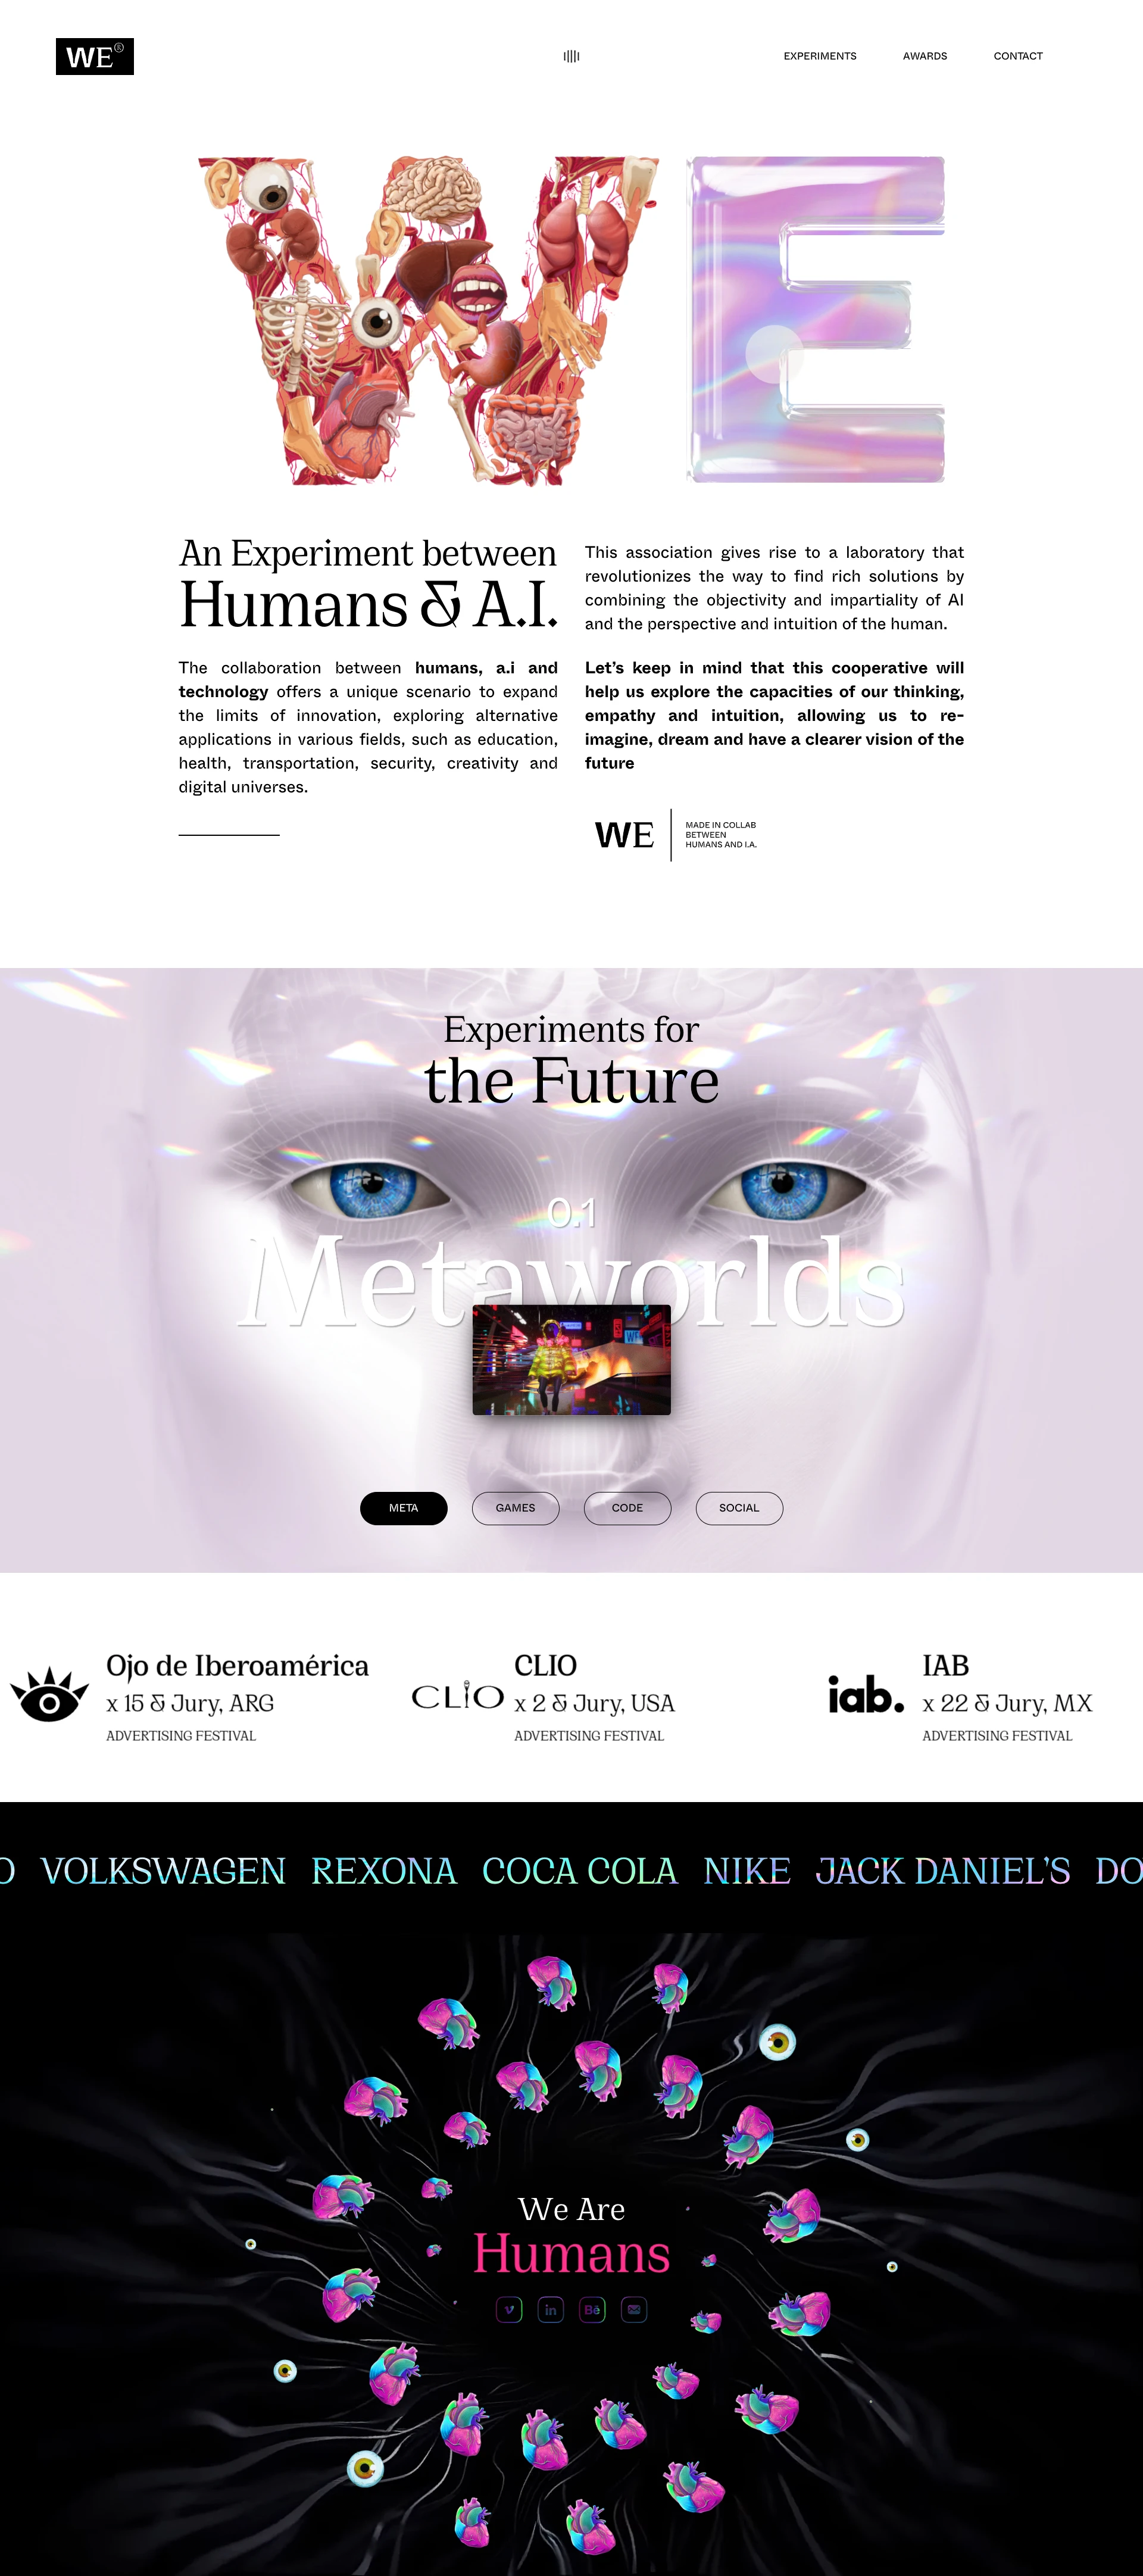 We. Landing Page Example: We are a full digital agency that combines the objectivity of AI and the intuition of the human to find new creative solutions.